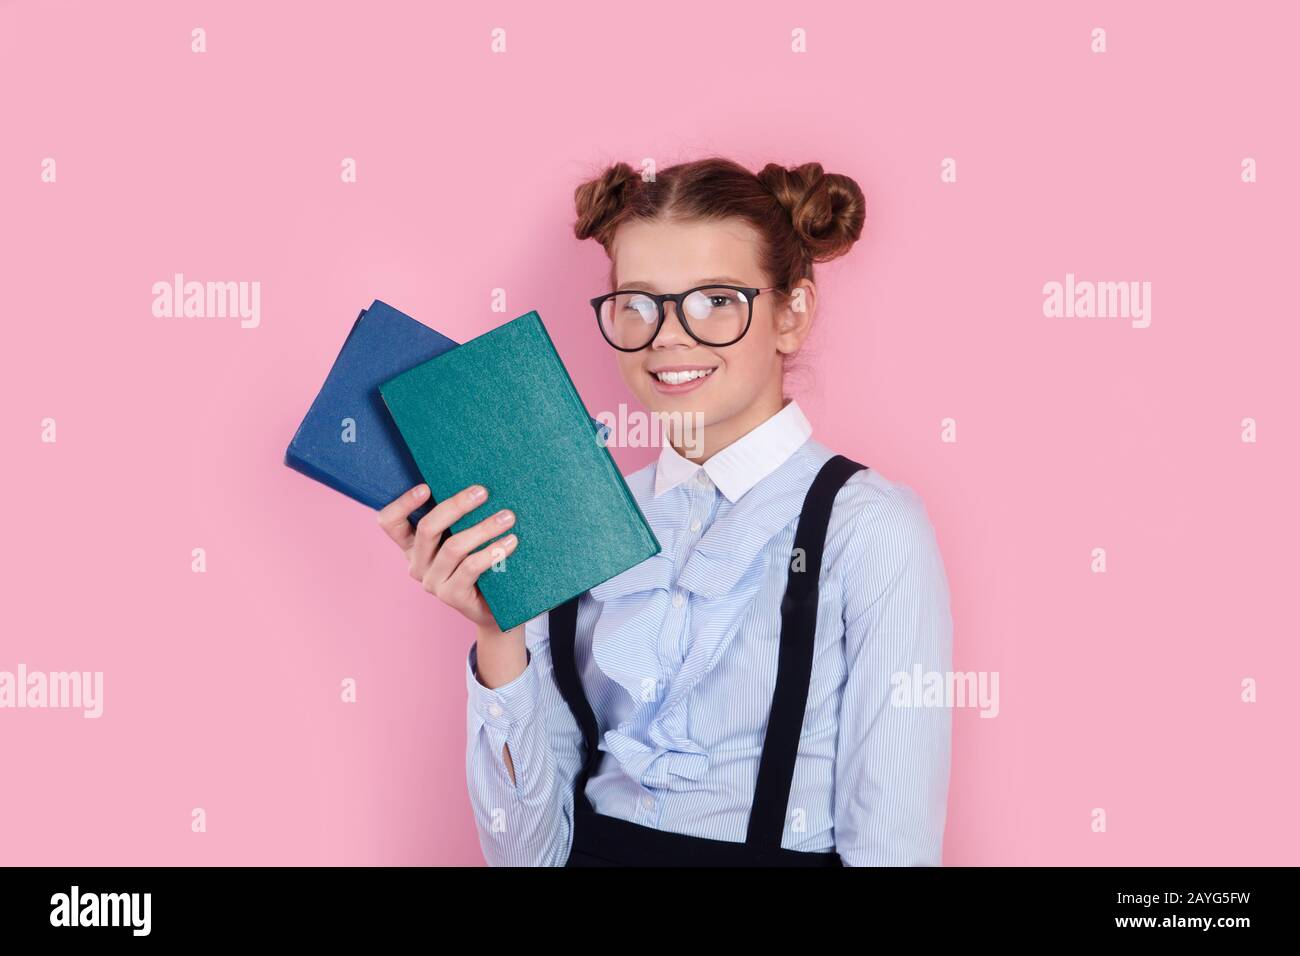 Young girl in school uniform and glasses holding books in her hands on pink background Stock Photo